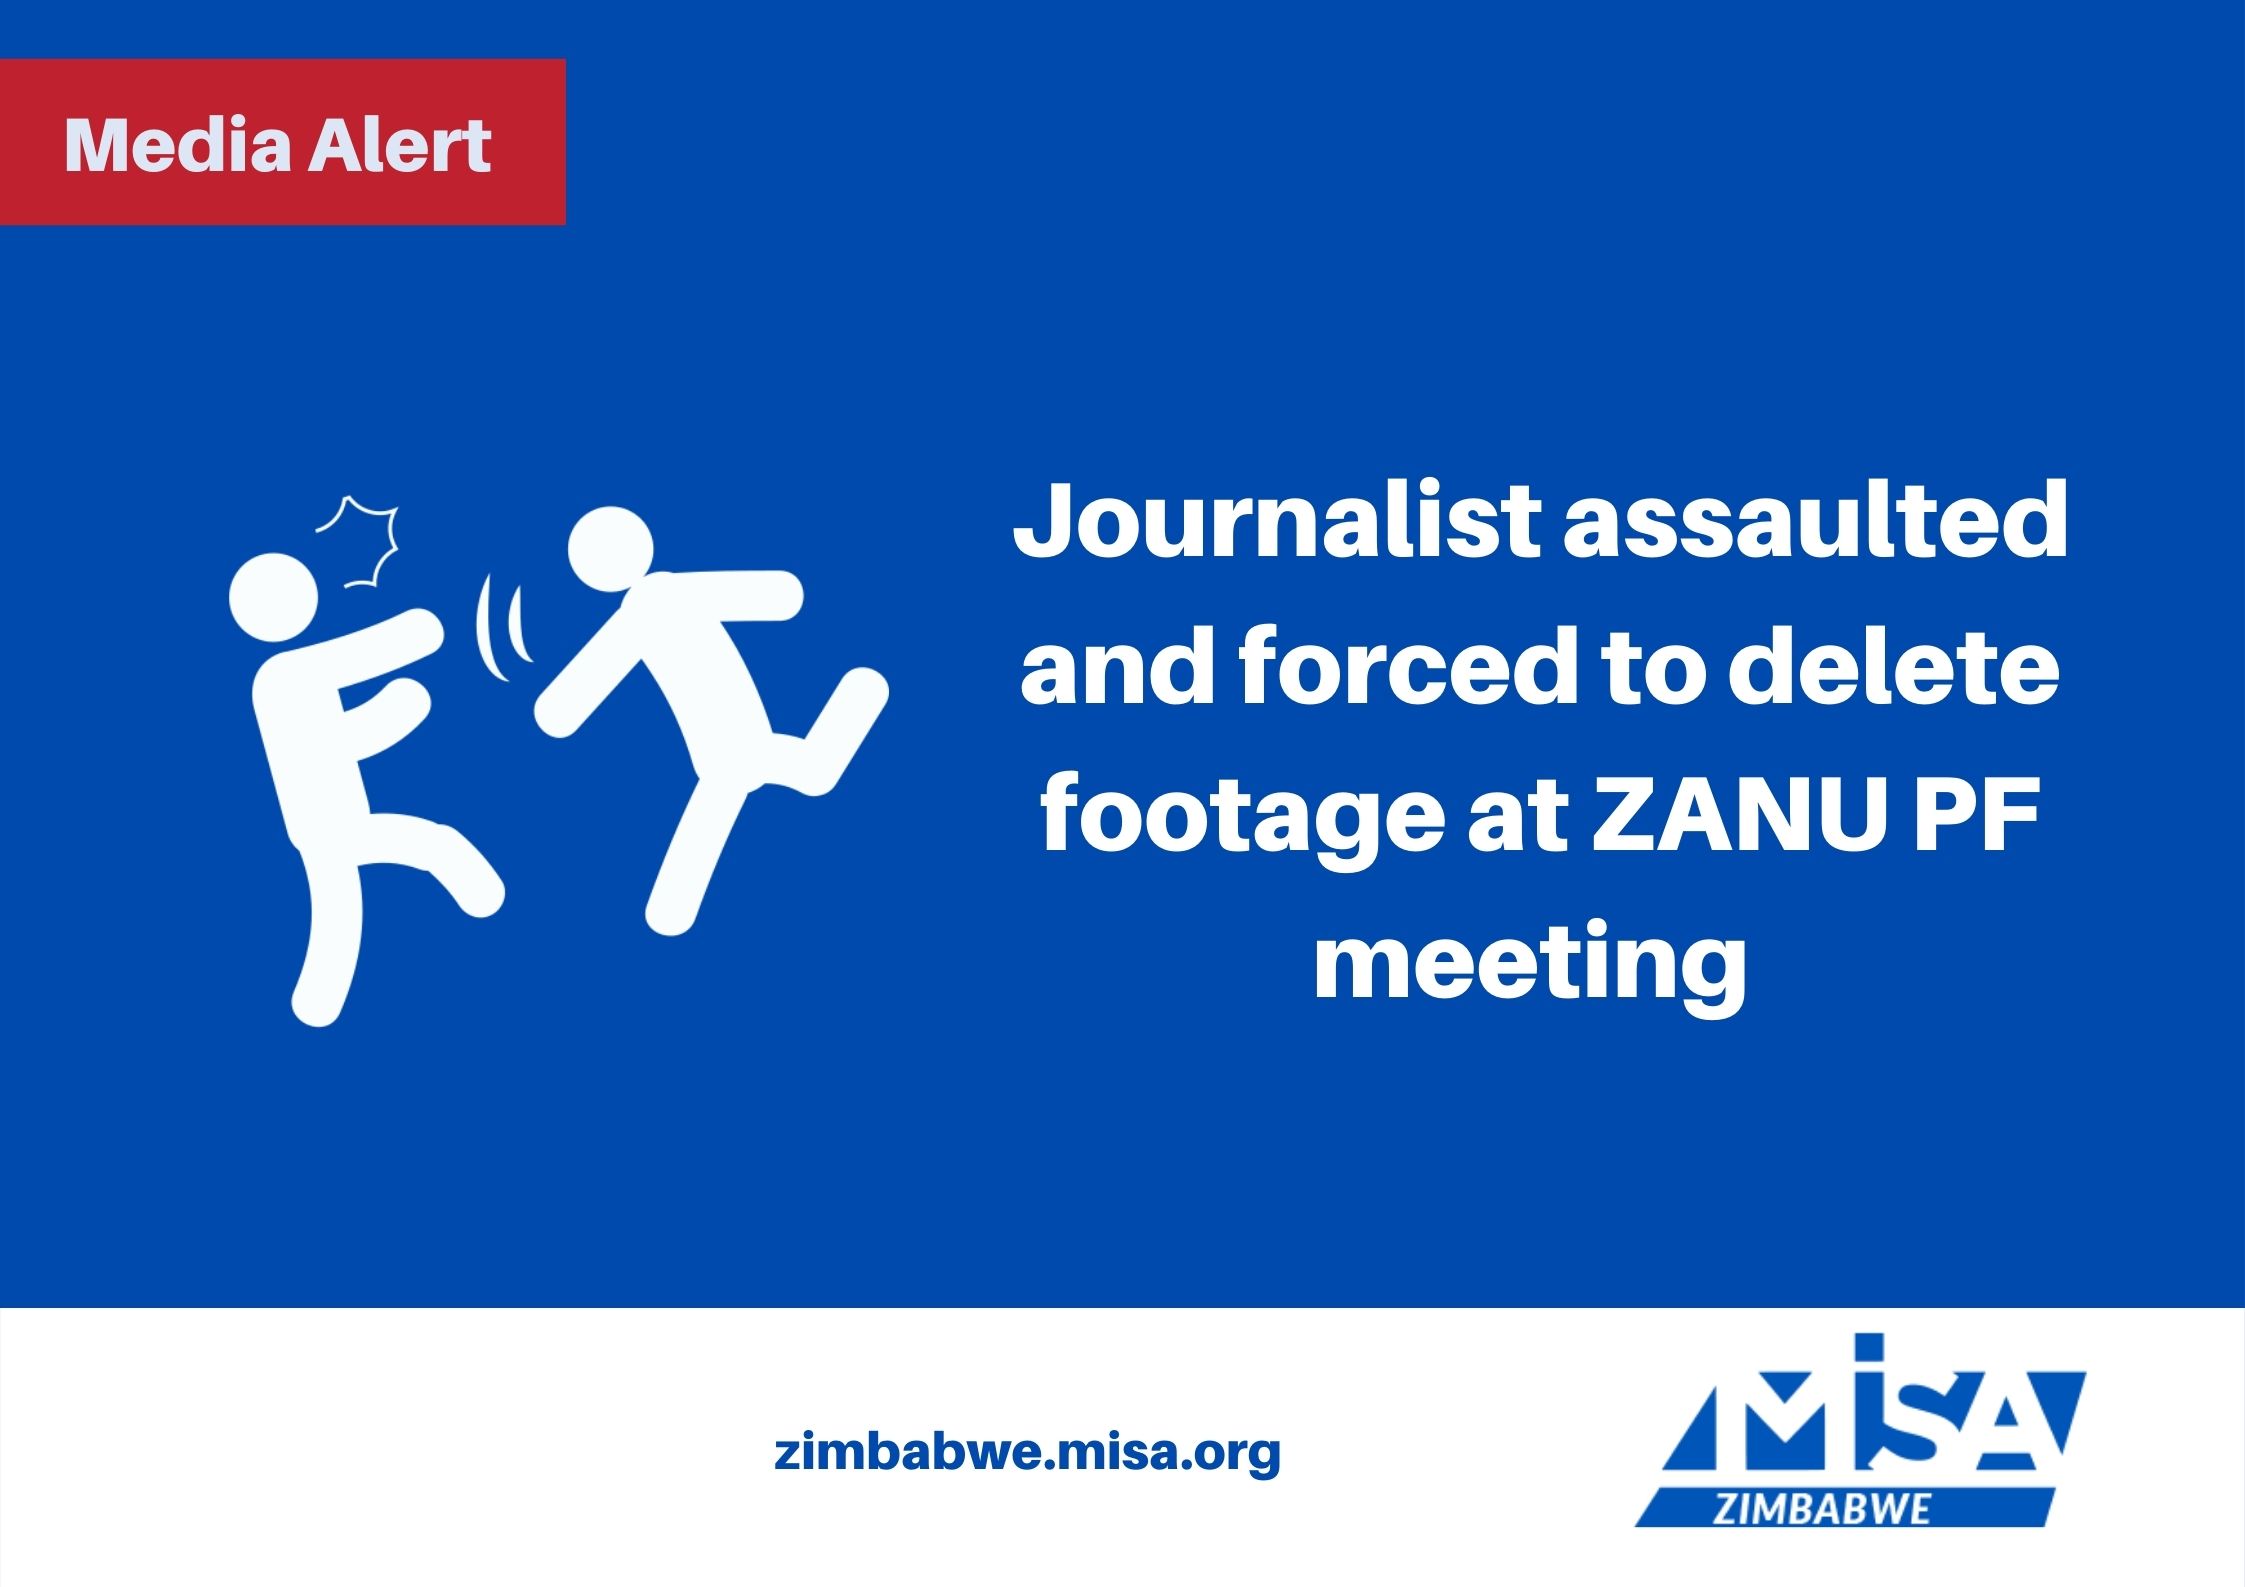 Journalist assaulted and forced to delete footage at ZANU PF meeting